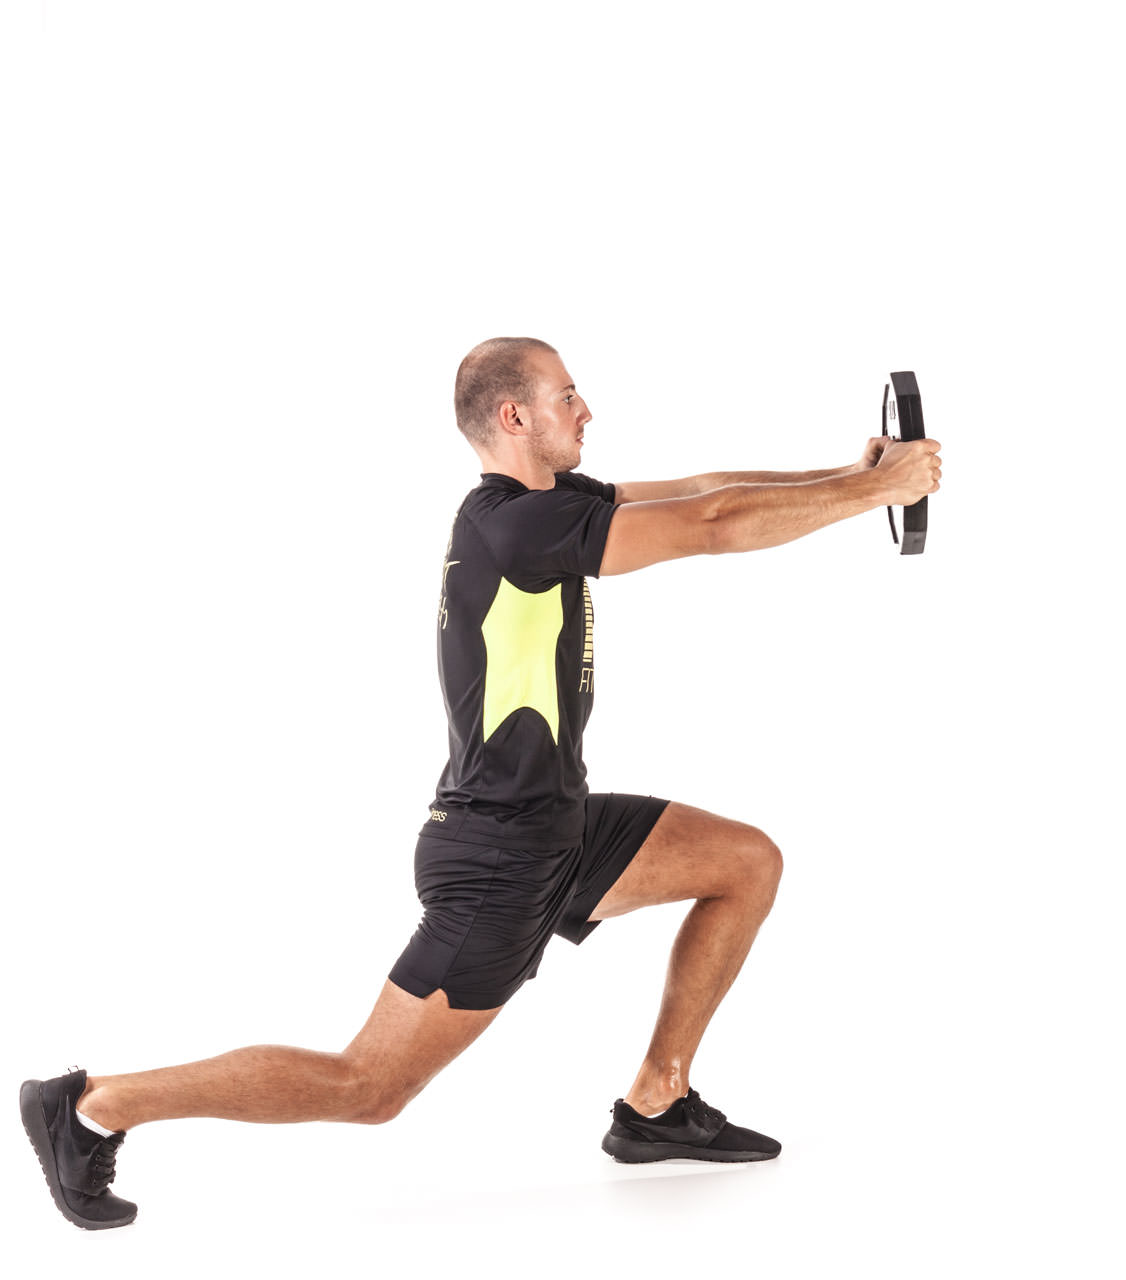 Plate Rear Lunge frame #2